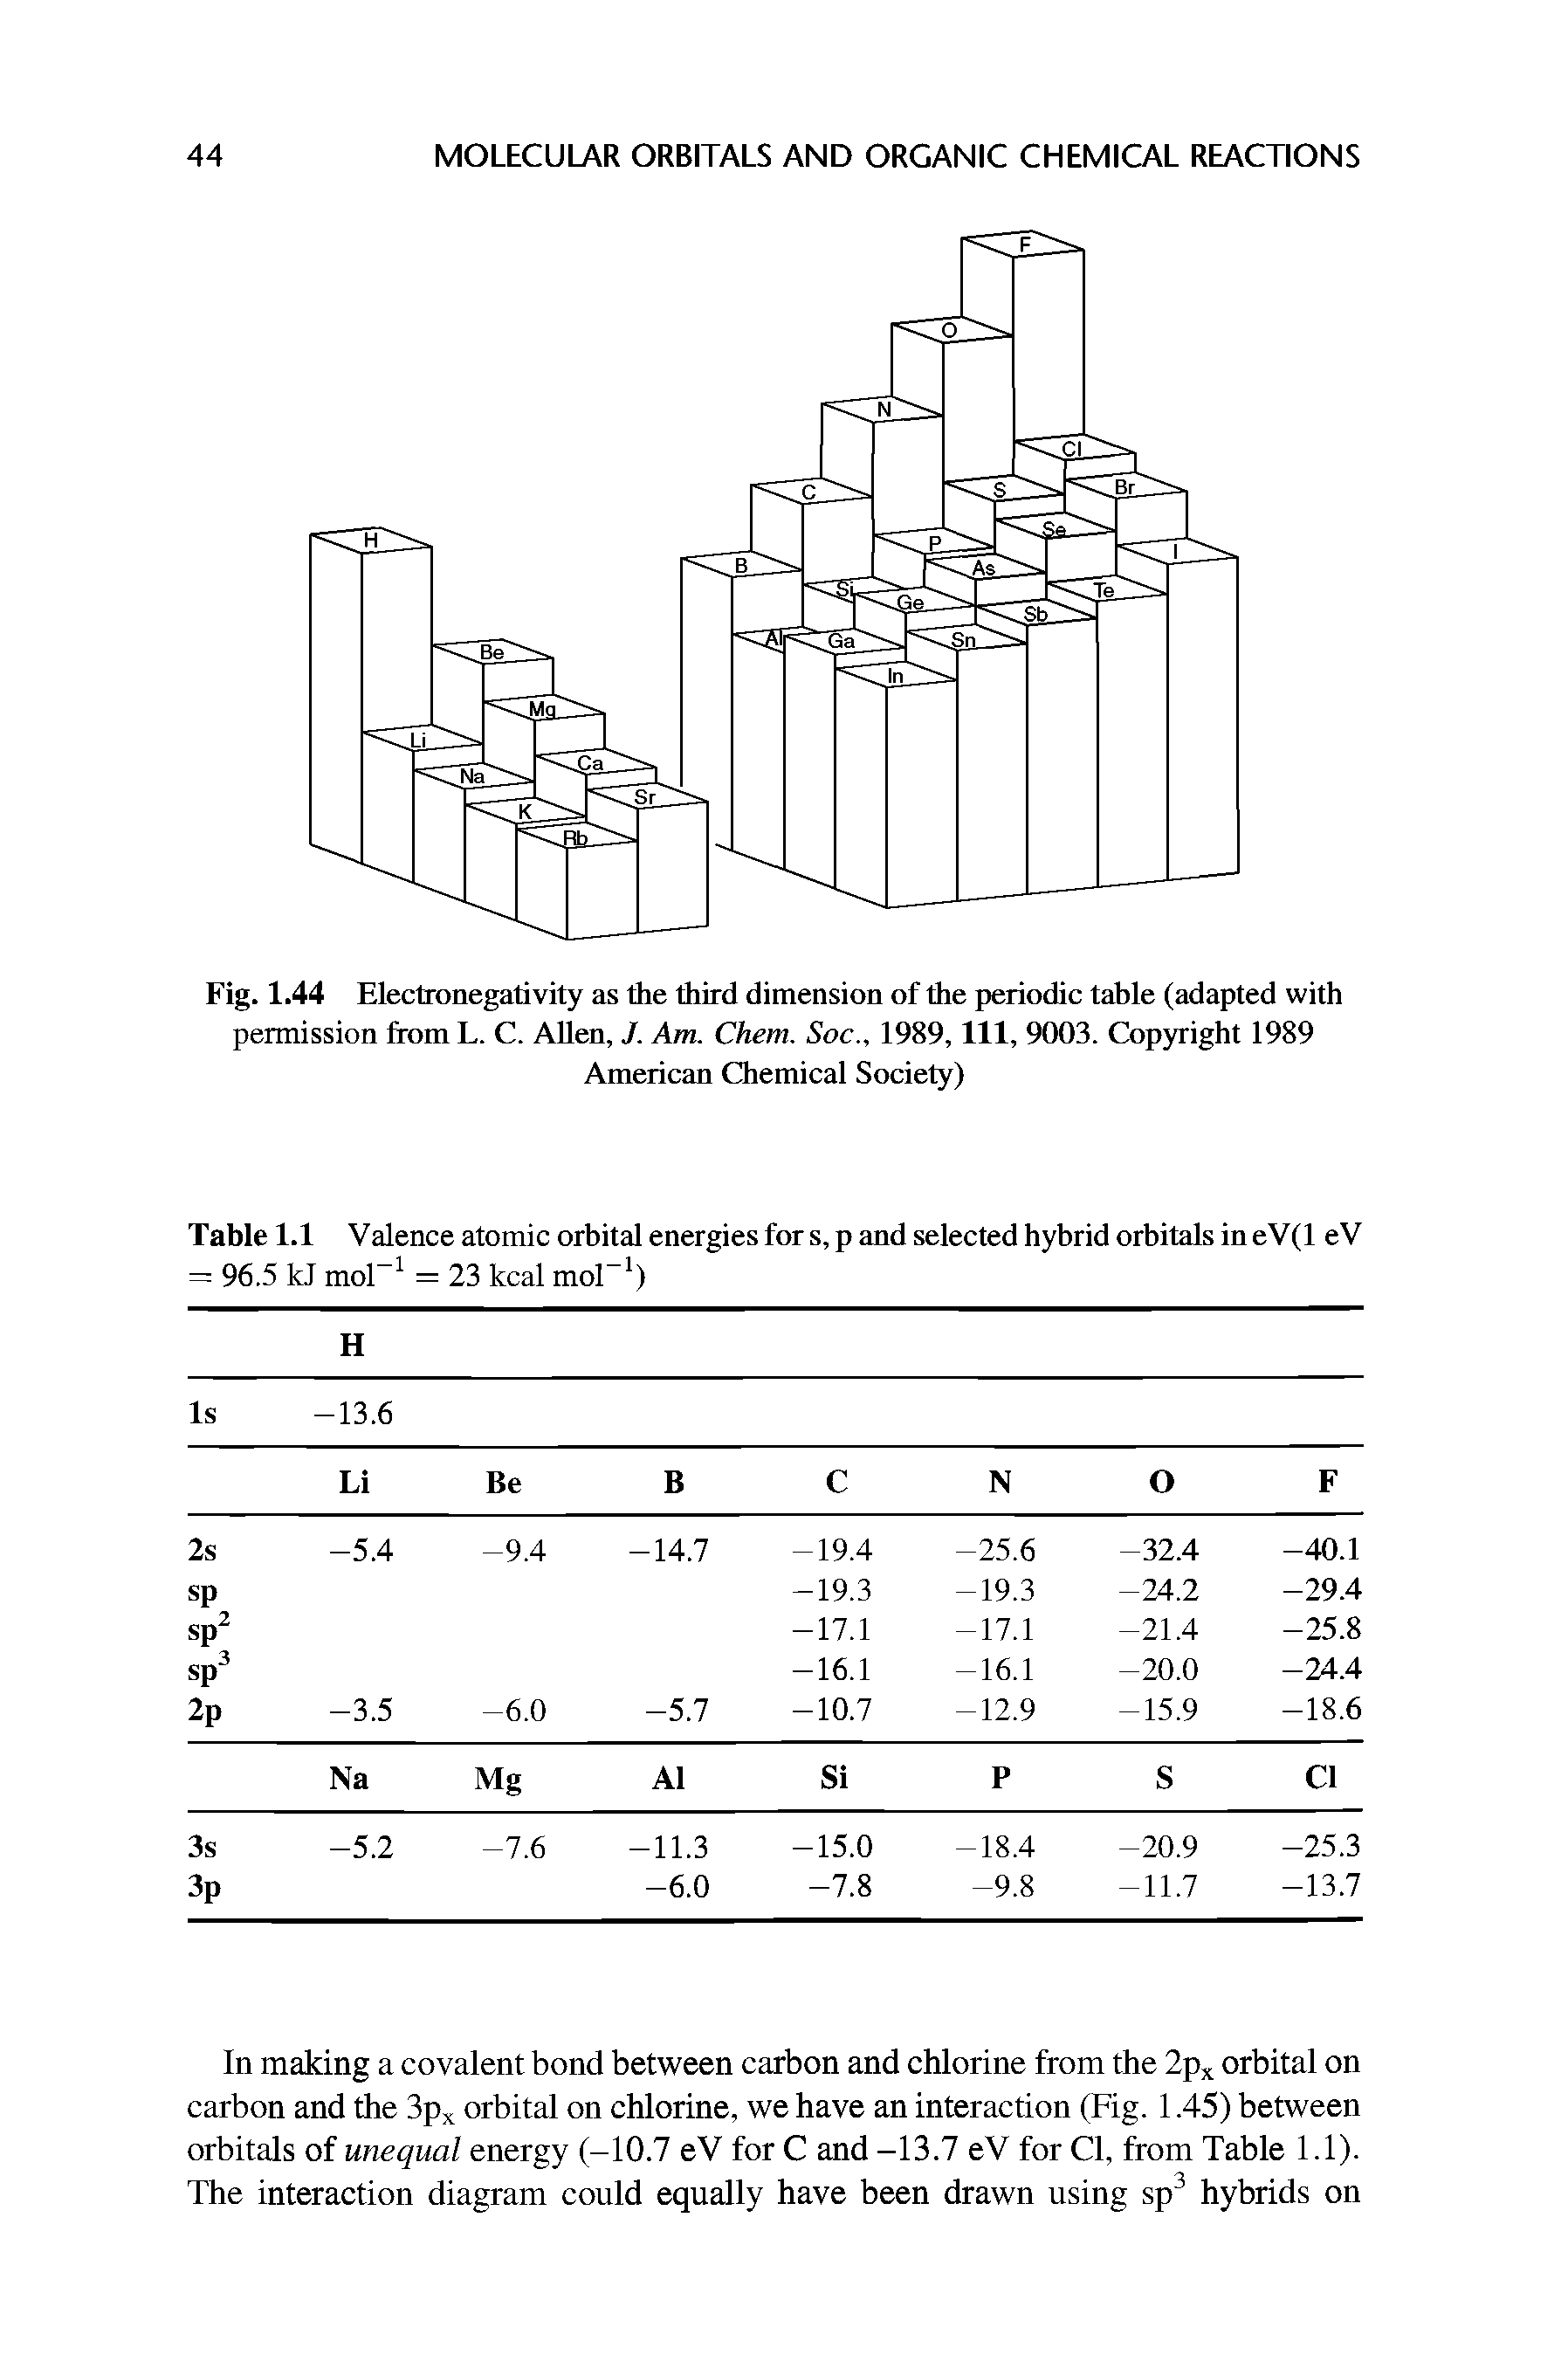 Fig. 1.44 Electronegativity as the third dimension of the periodic table (adapted with permission from L. C. Allen, J. Am. Chem. Soc., 1989, 111, 9003. Copyright 1989 American Chemical Society)...